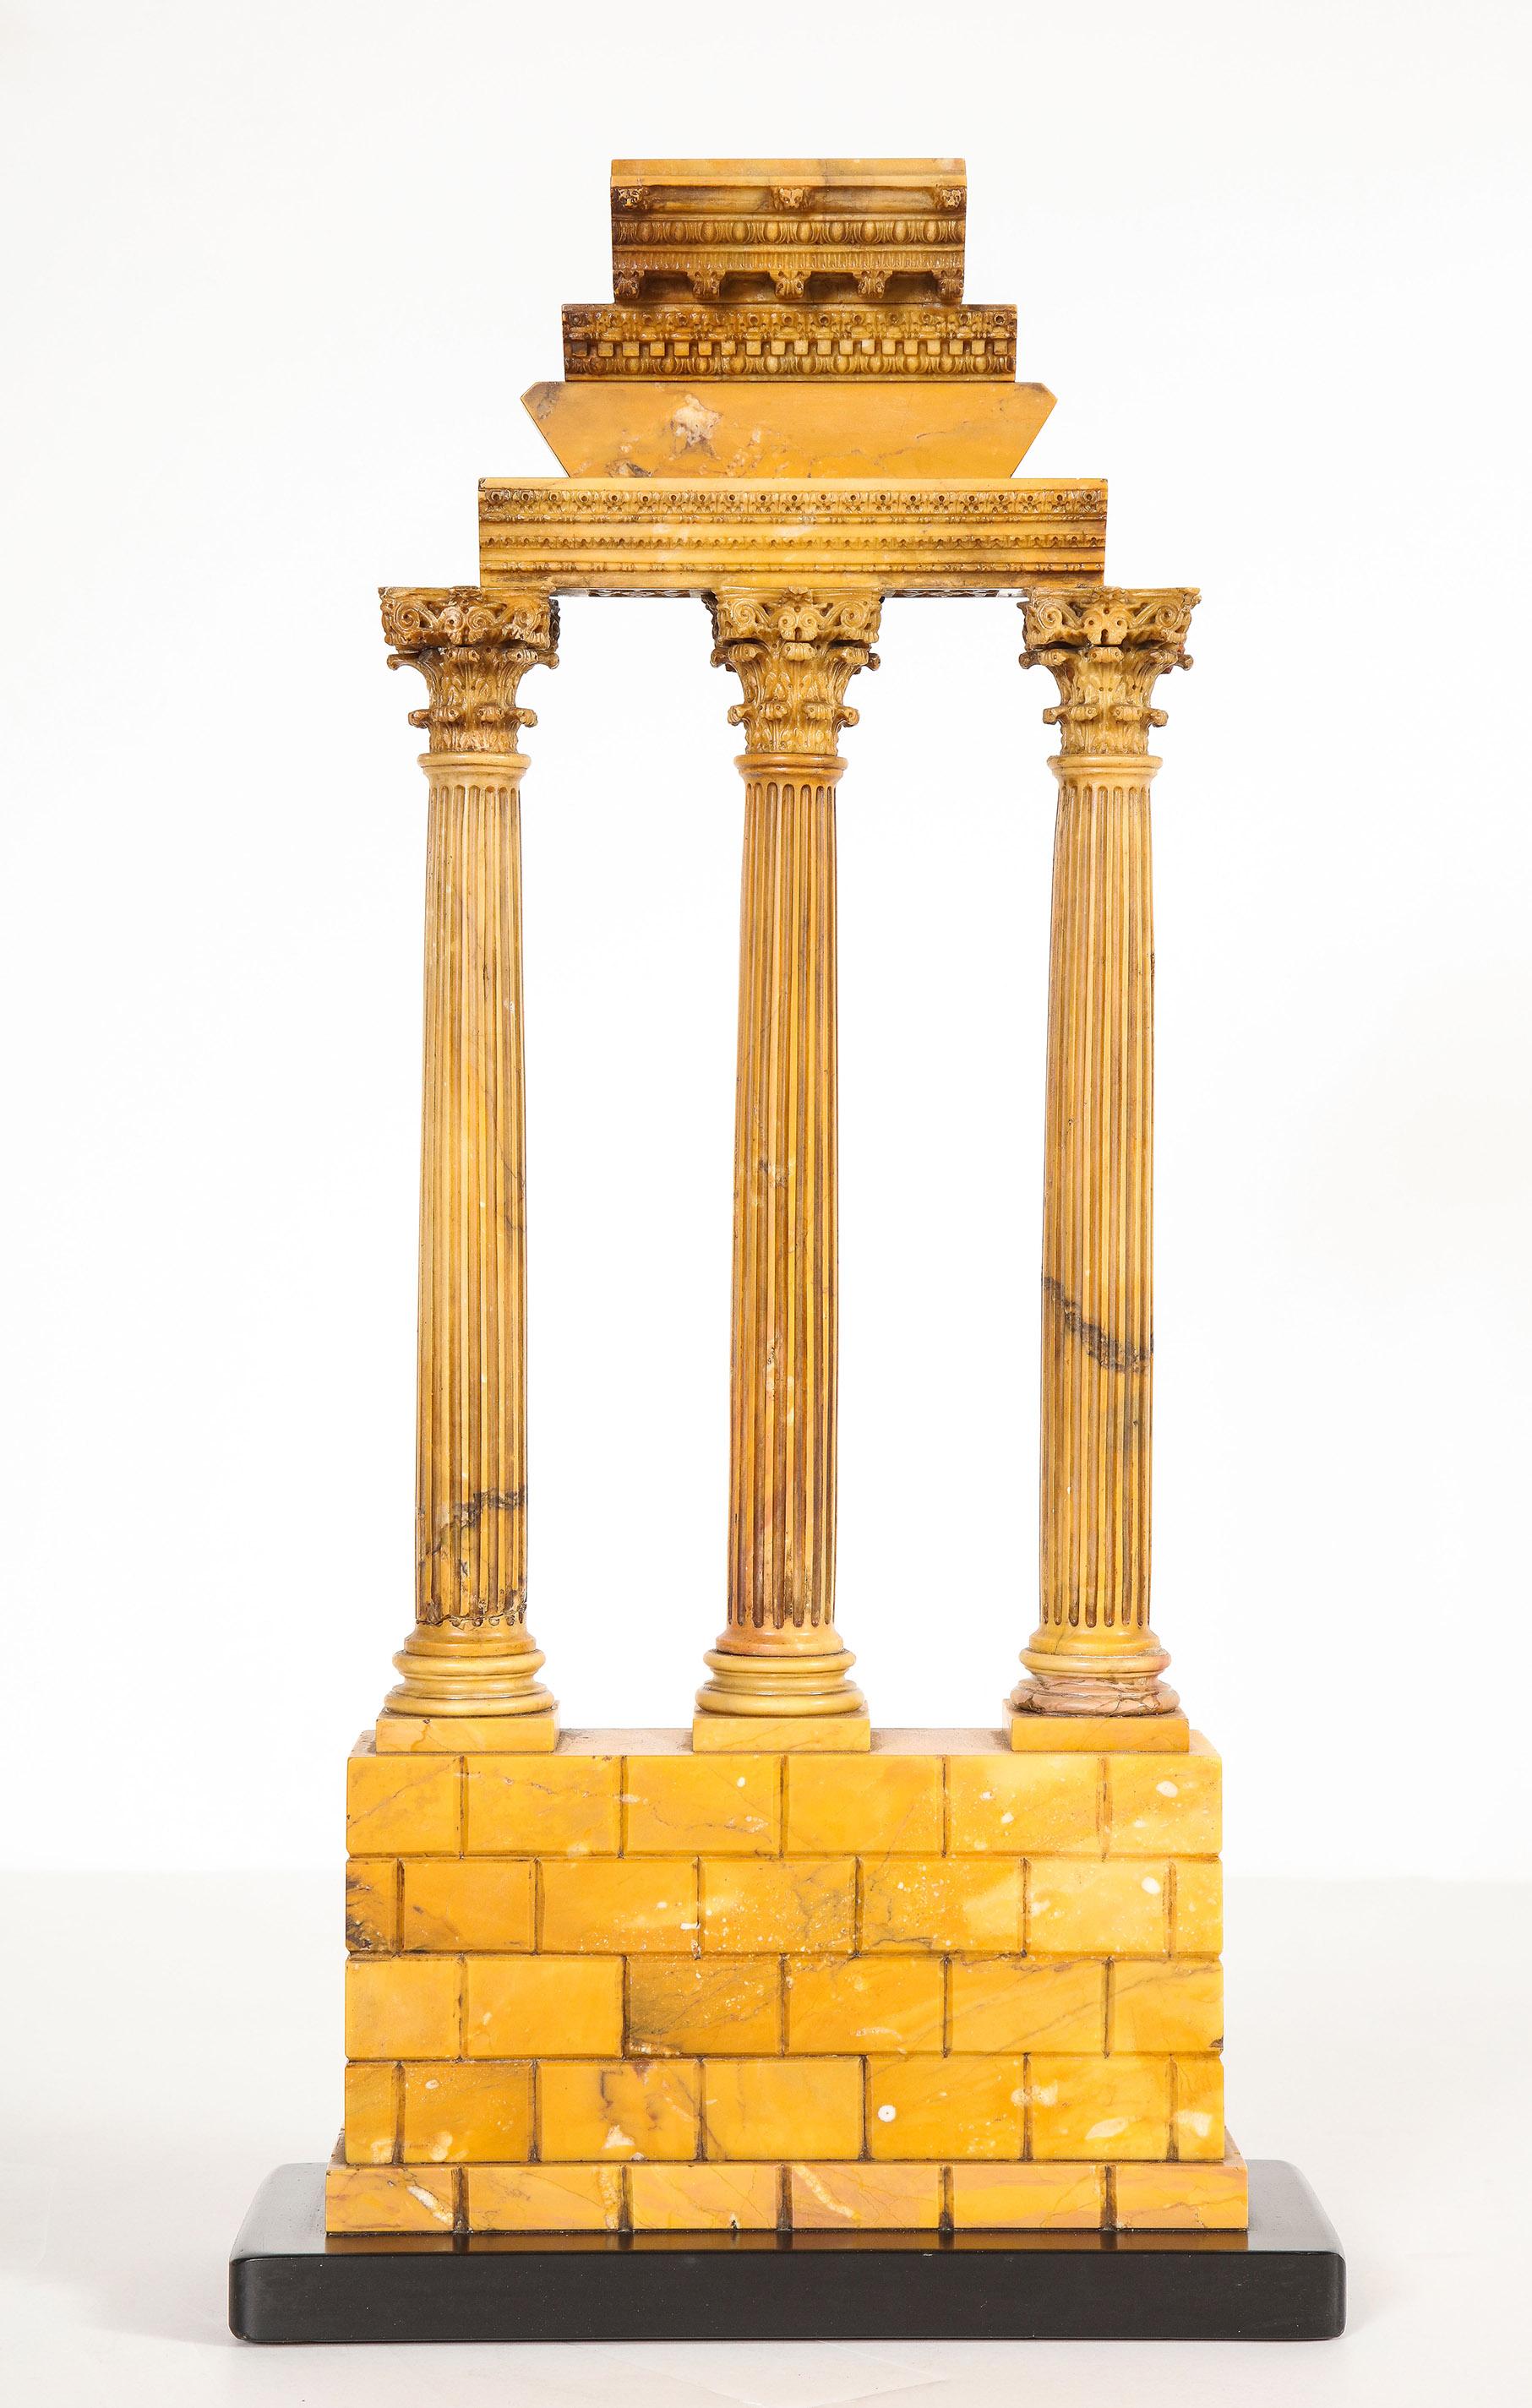 Carved Giallo Antico Grand Tour model of the temple of Caster and Pollux

Large carved Giallo Antico Grand Tour model of the temple of Caster and Pollux of superb carving, the fragmented cornice above fluted Corinthian columns and temple